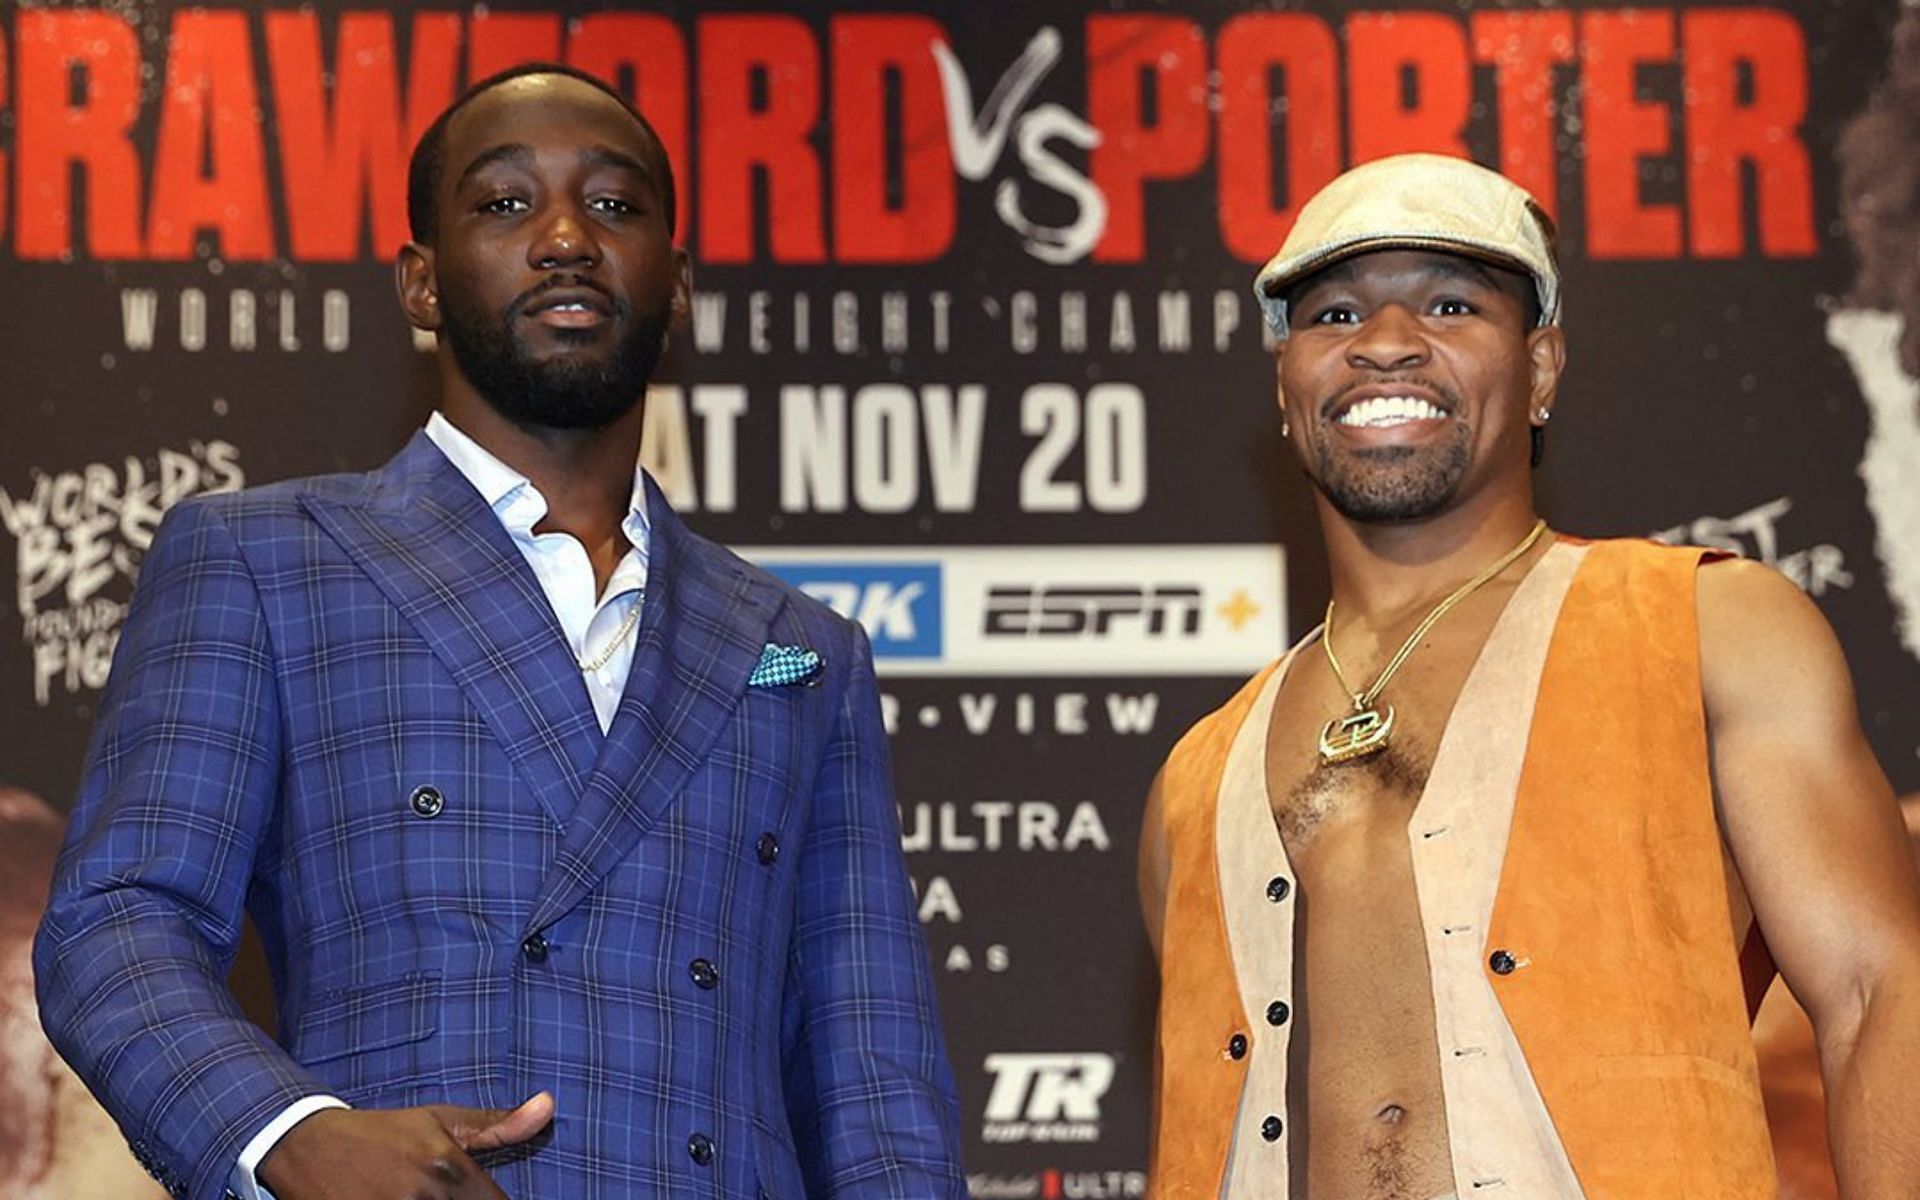 Terence Crawford vs. Shawn Porter press conference [Image Courtesy: @toprank on Instagram]